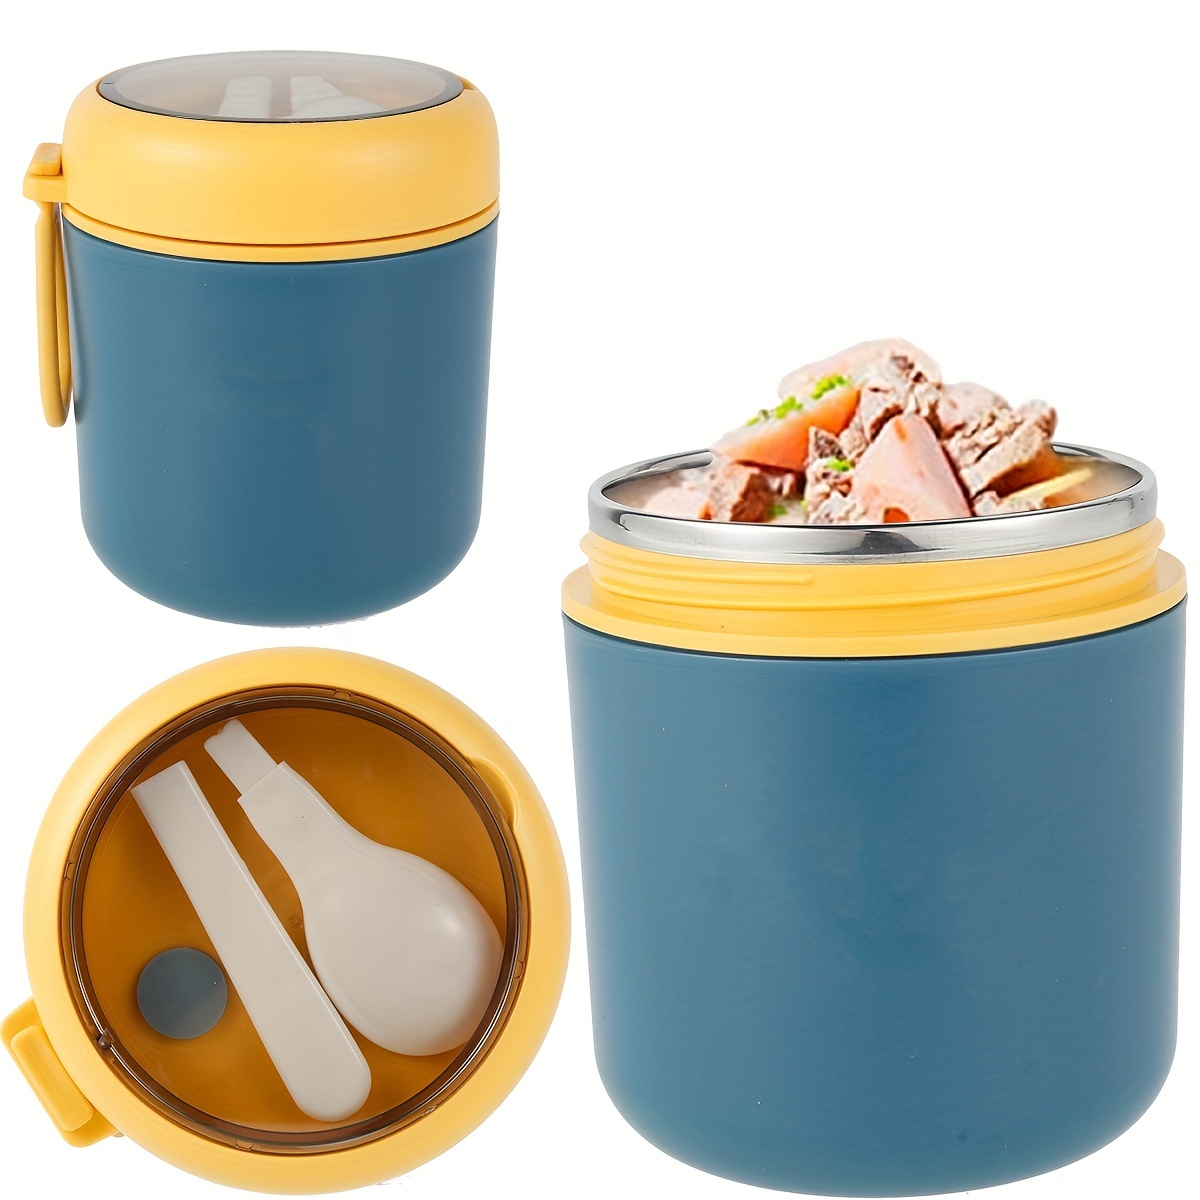 

400ml-500ml/13.53oz-16.91oz Stainless Steel Soup Cup, Thermal Lunch Box, Food Container With Spoon, Insulated Bento Box